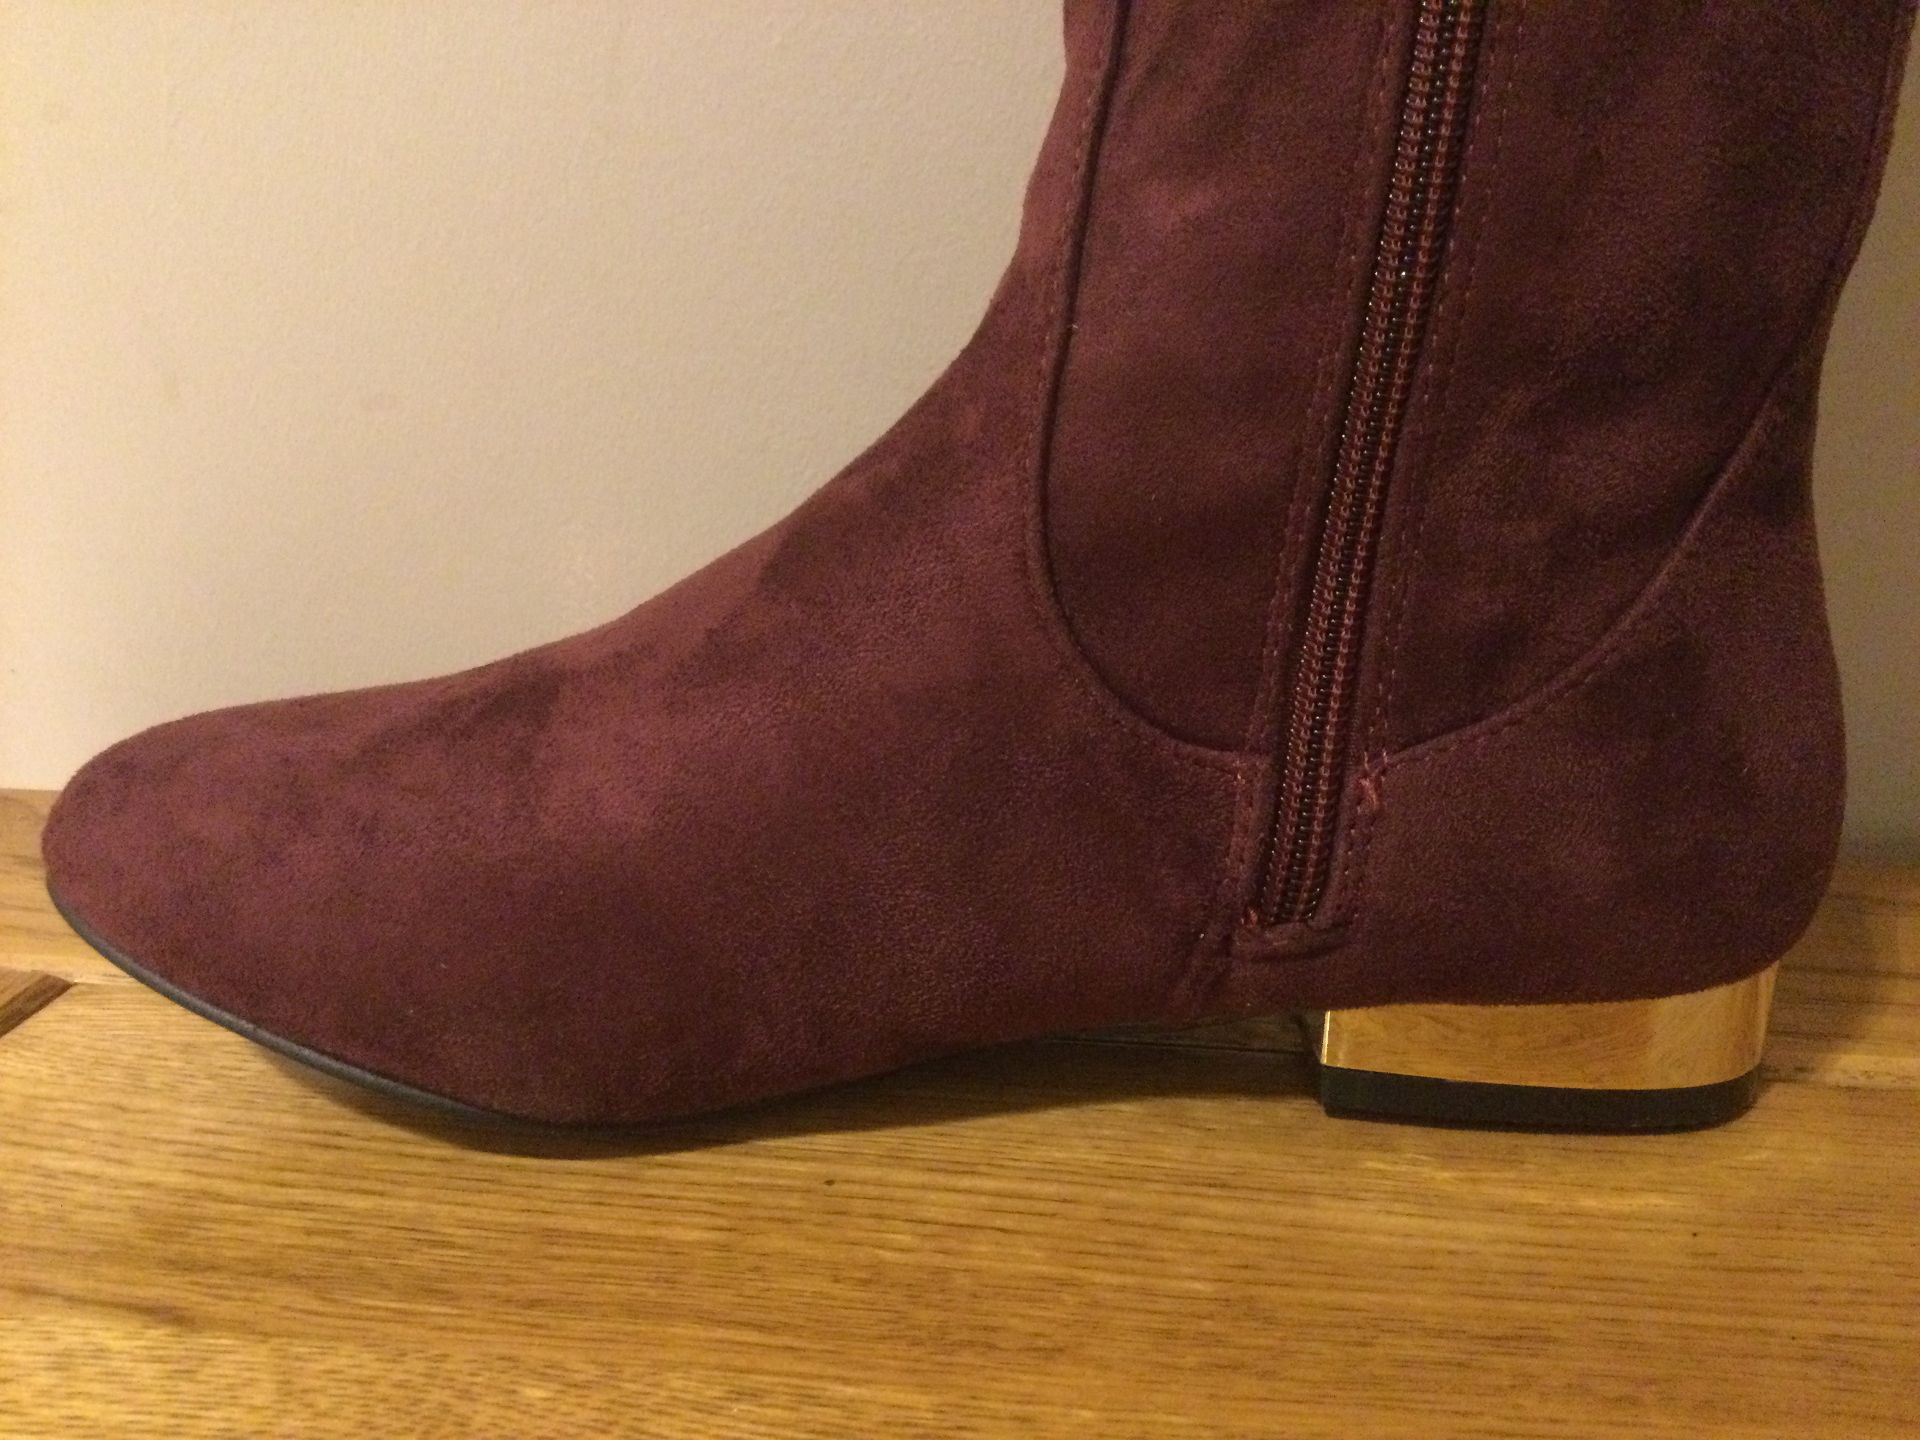 Dolcis “Katie” Long Boots, Low Block Heel, Size 4, Burgundy- New RRP £55.00 - Image 3 of 7